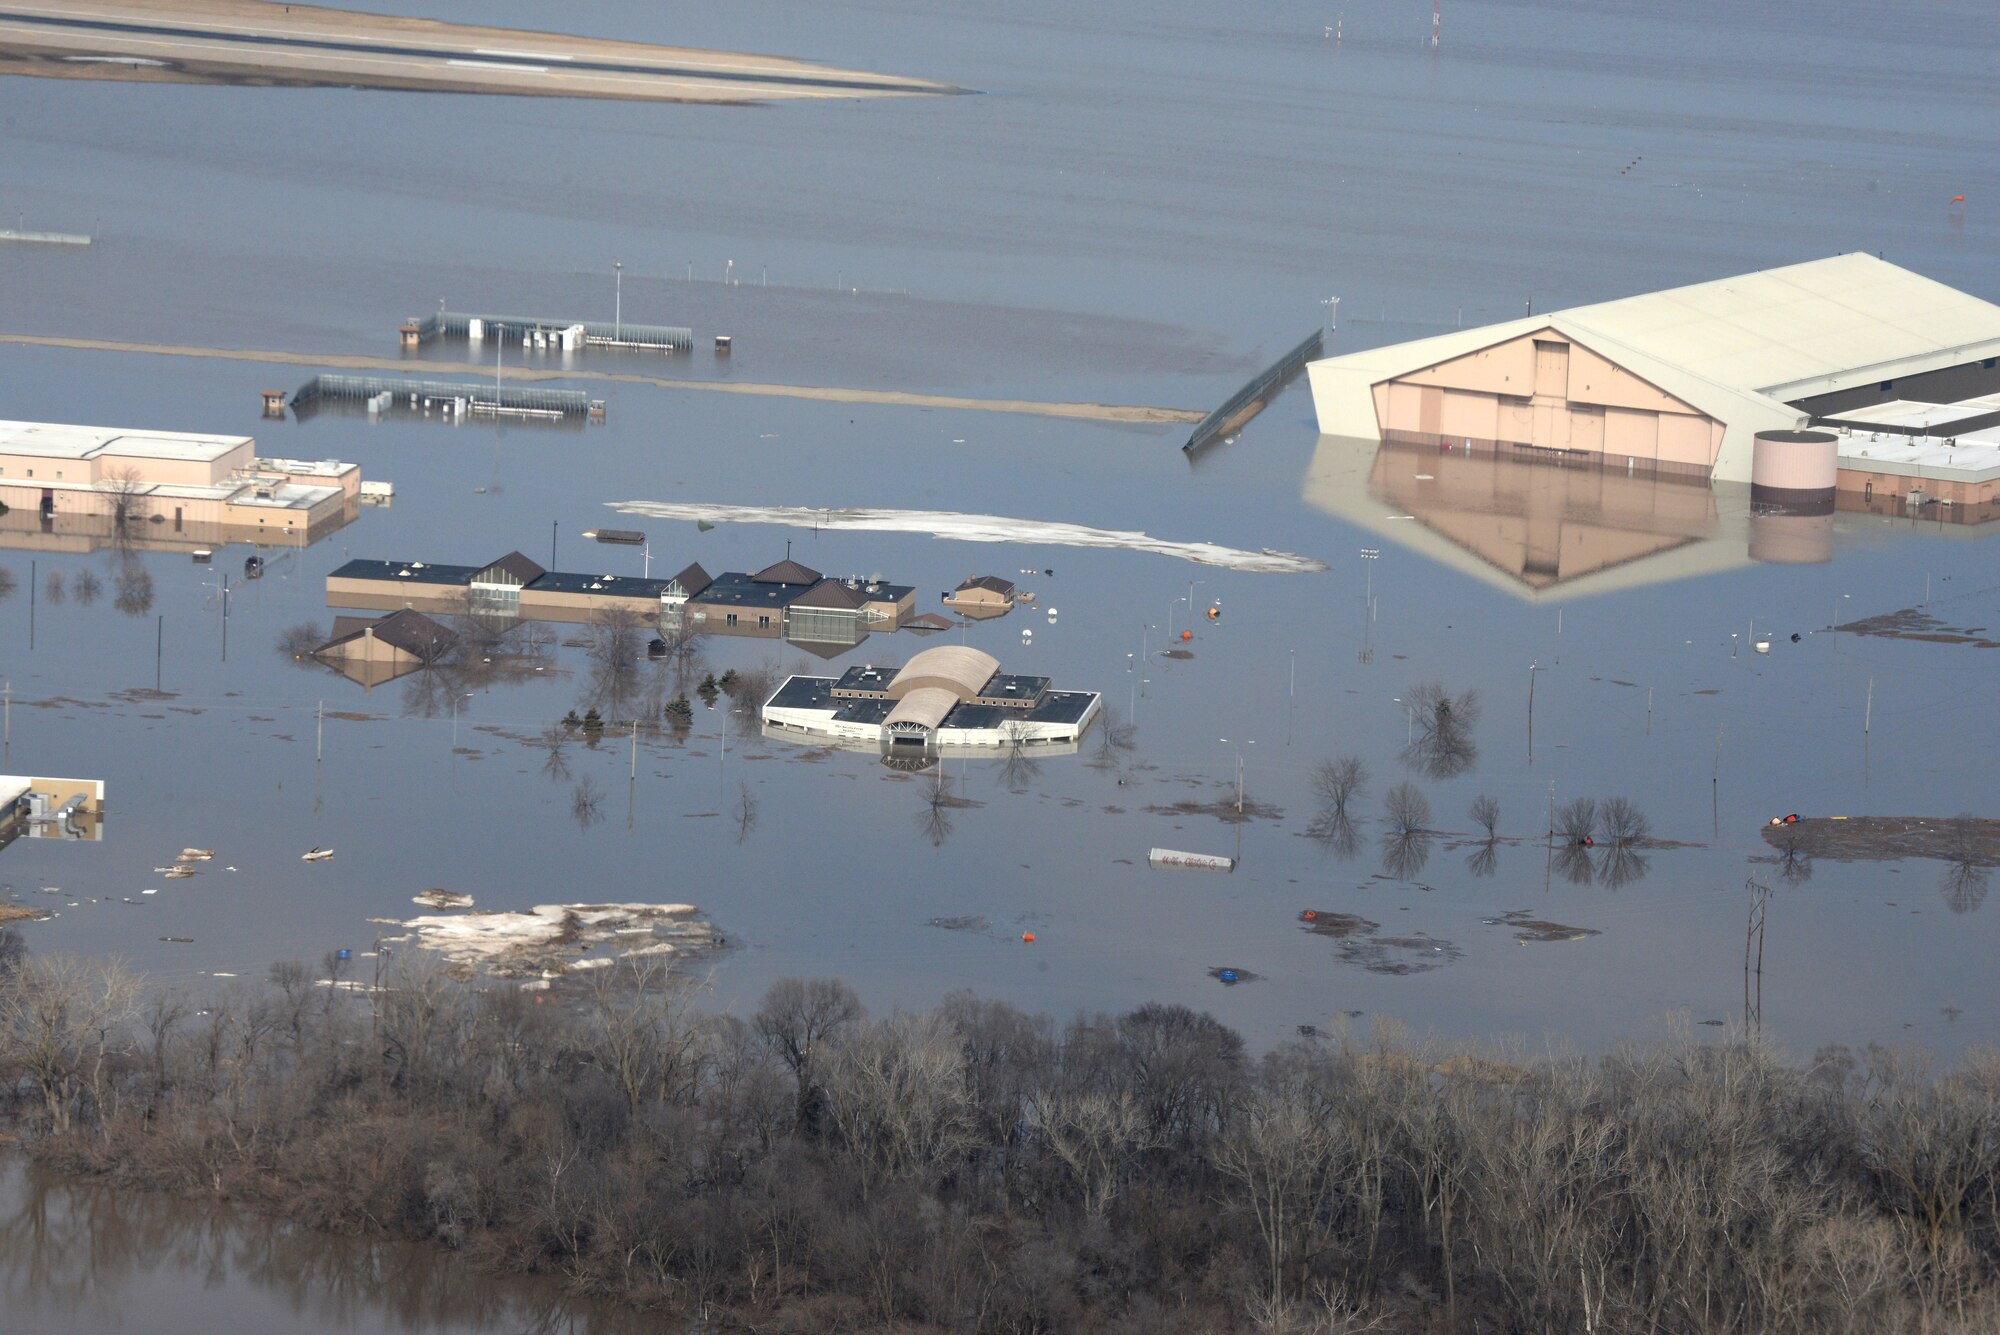 Arial photography of Offutt Air Force Base, Nebraska, taken March 17. One-third of Offutt Air Force Base, Nebraska, was under water after the Missouri River flooded. A U.S. Army Engineering and Support Center, Huntsville Fuels Program contract maintains and repairs bulk fuel sorage facilities and equipment and is being used in flood recovery efforts at the base.